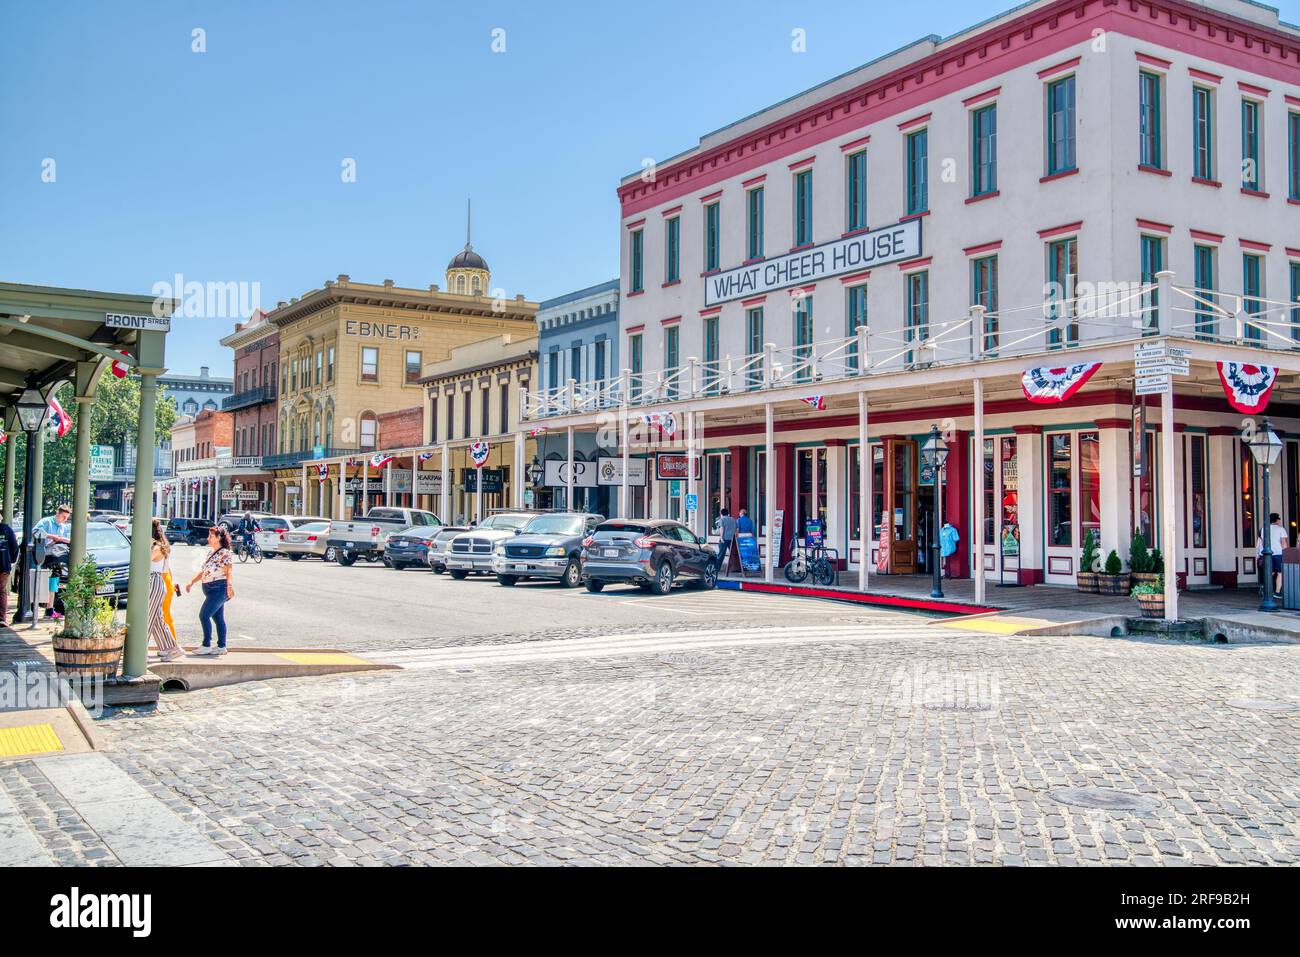 Sacramento, CA - May 25, 2023: Historic buildings line the street in Old Town Sacramento located near the waterfront of the city of Sacramento, Califo Stock Photo